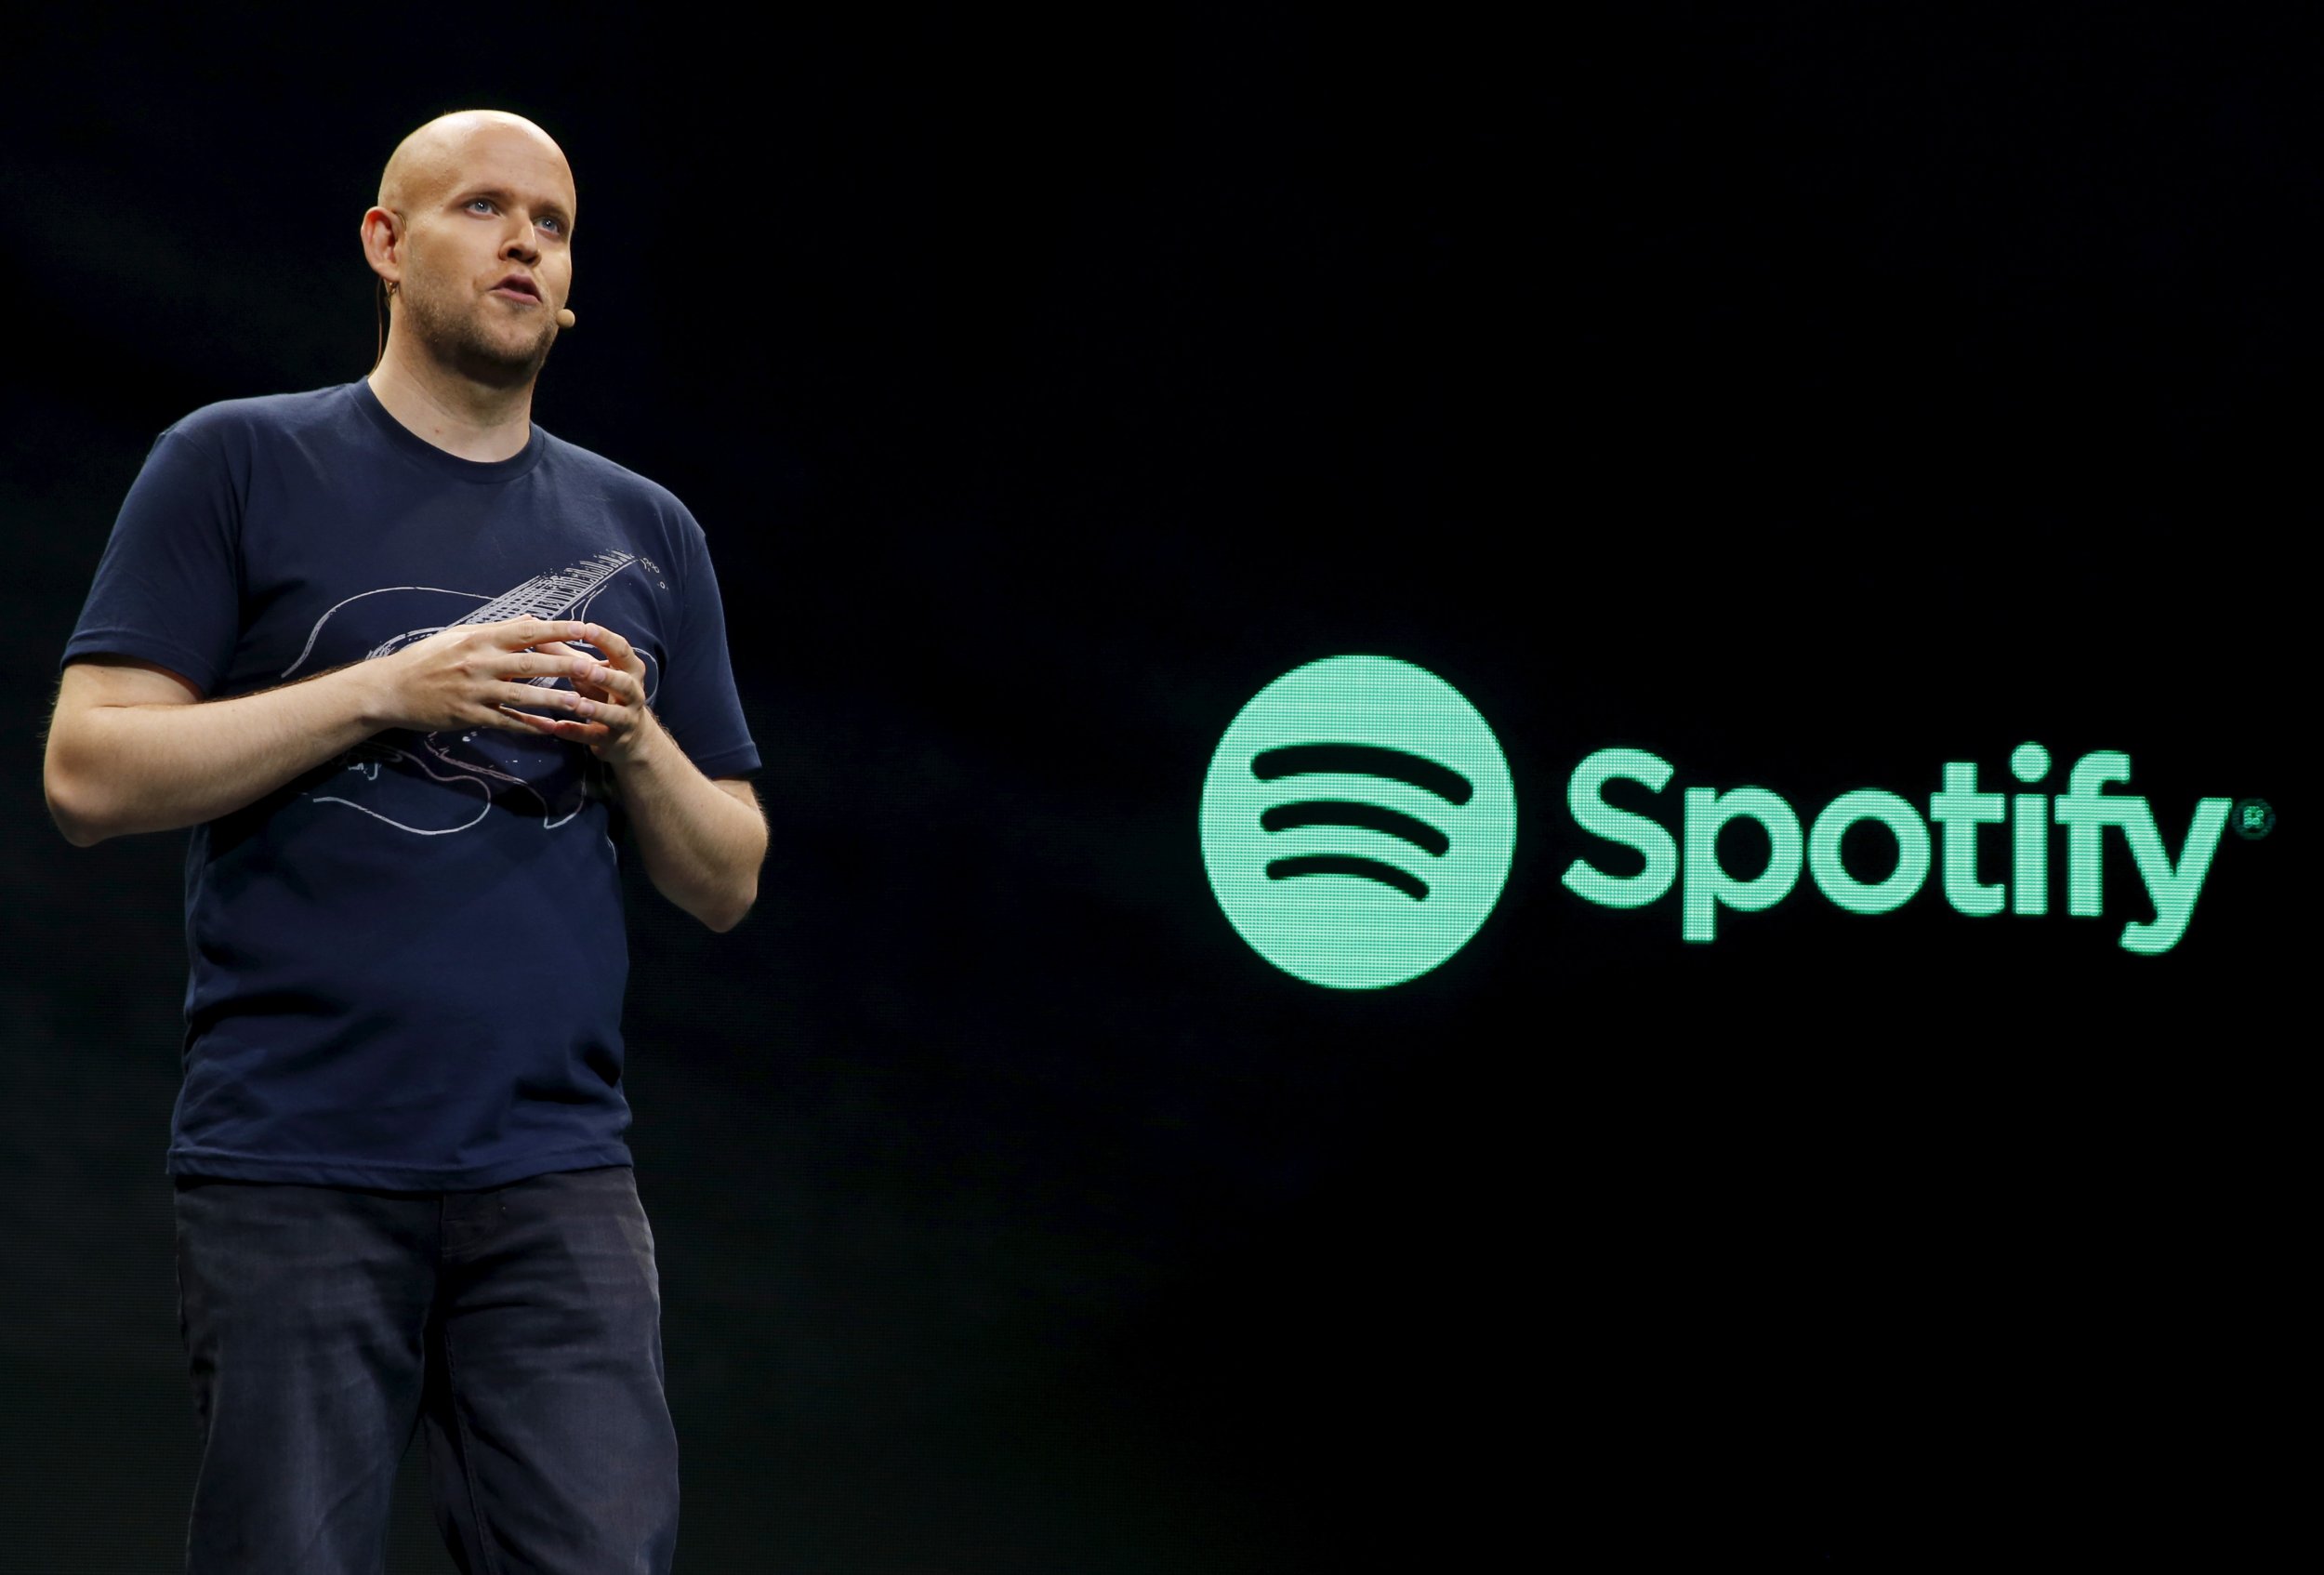 Spotify Now Has 30 Million Paying Subscribers As Rapid Growth Spurt